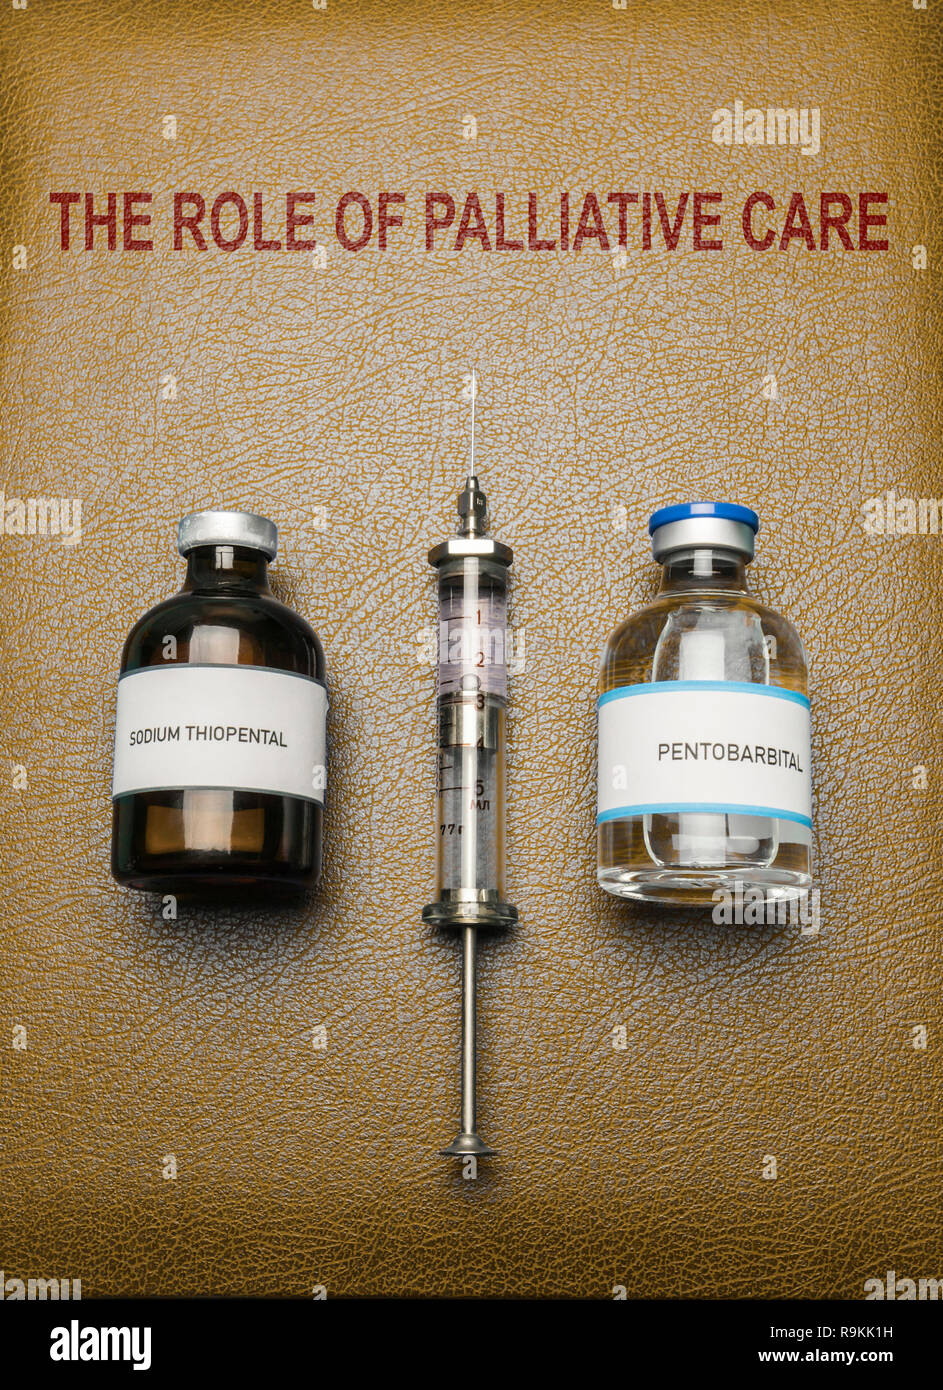 Book of The role of palliative care, vials of sodium thiopental anesthesia and pentobarbital, concept on euthanasia, composition digital imaginary Stock Photo